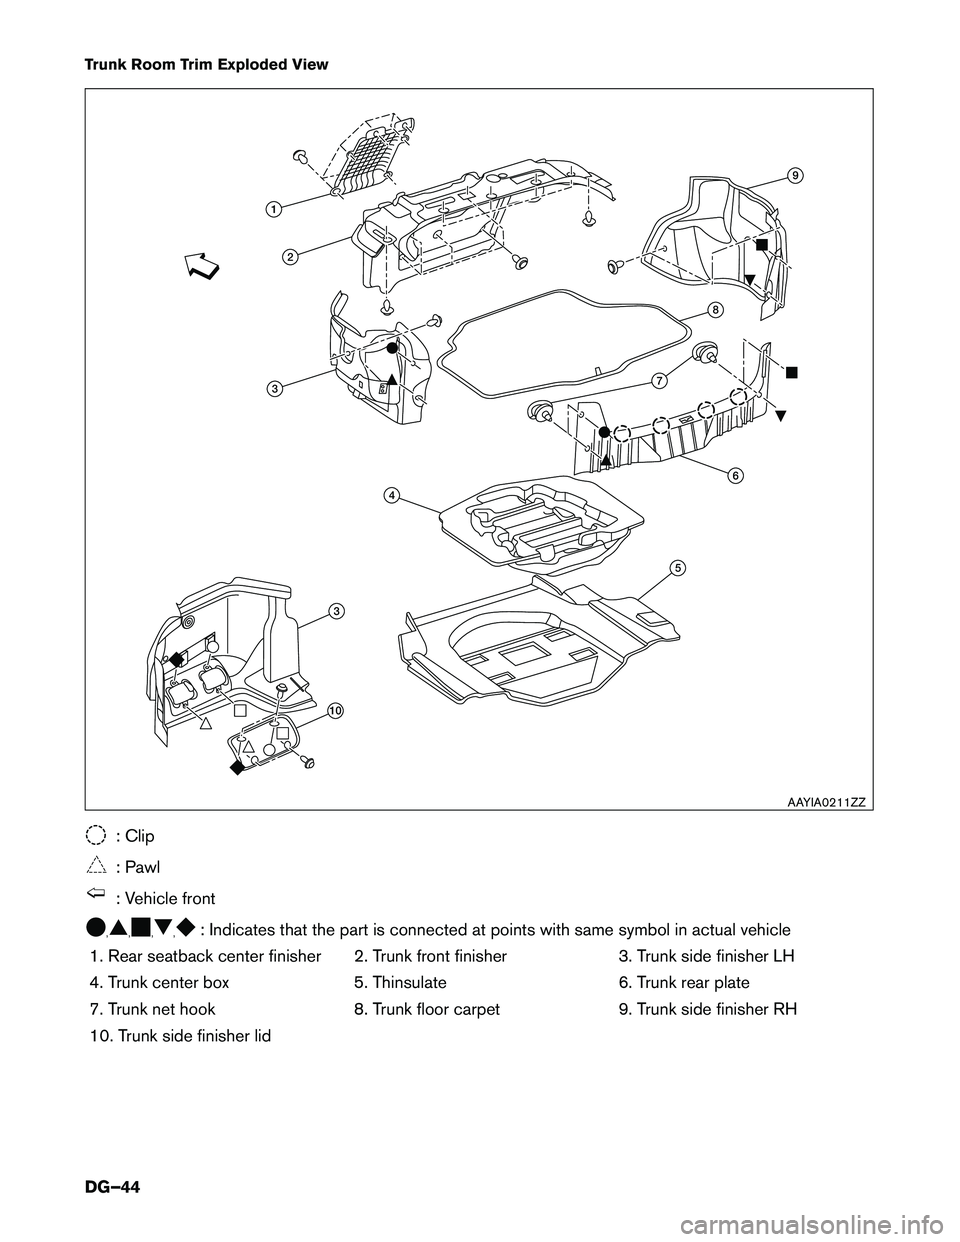 INFINITI Q50 HYBRID 2017  Dismantling Guide Trunk Room Trim Exploded View
: Clip
: Pawl
: Vehicle front
, , , ,
: Indicates that the part is connected at points with same symbol in actual vehicle
1.
Rear seatback center finisher 2. Trunk front 